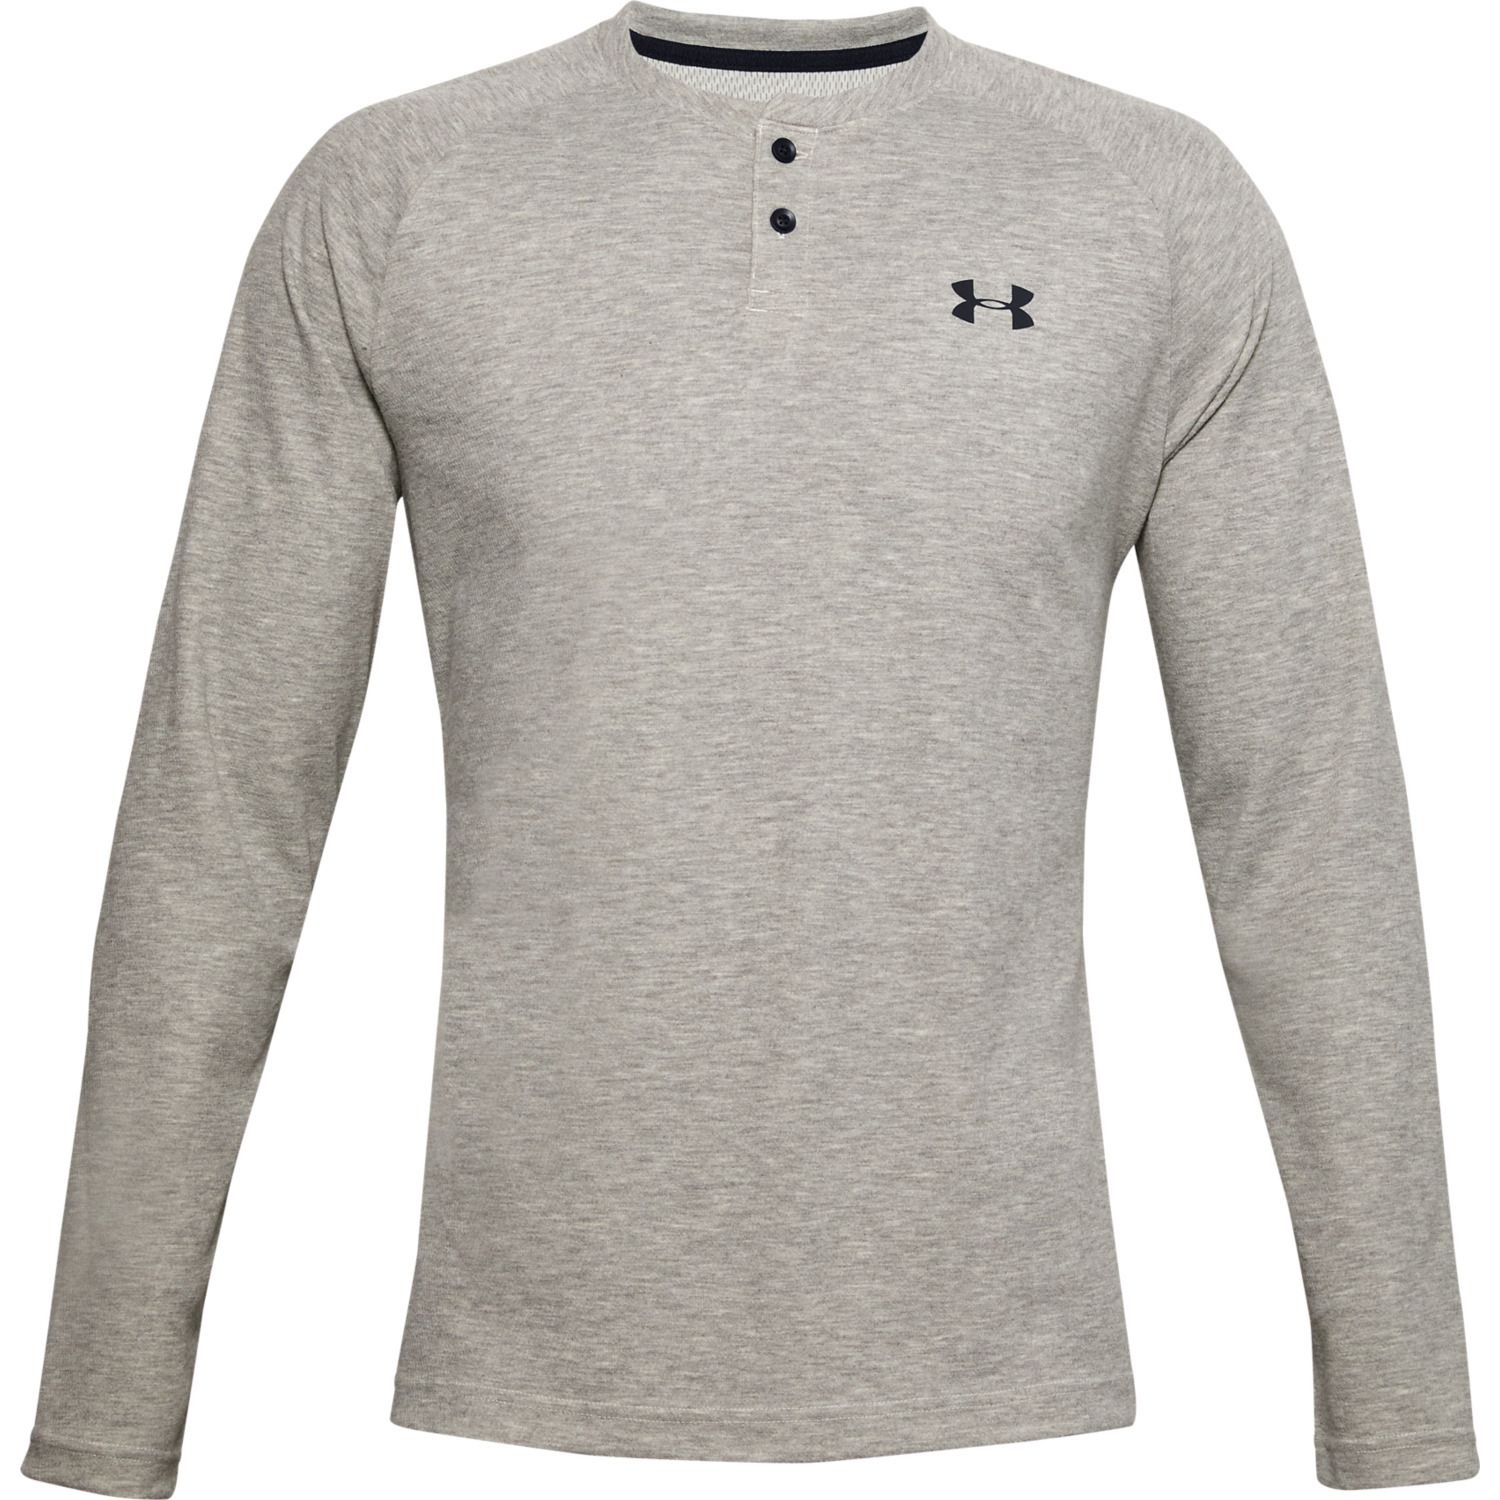 Under Armour T-Shirts Long Sleeve Tops 